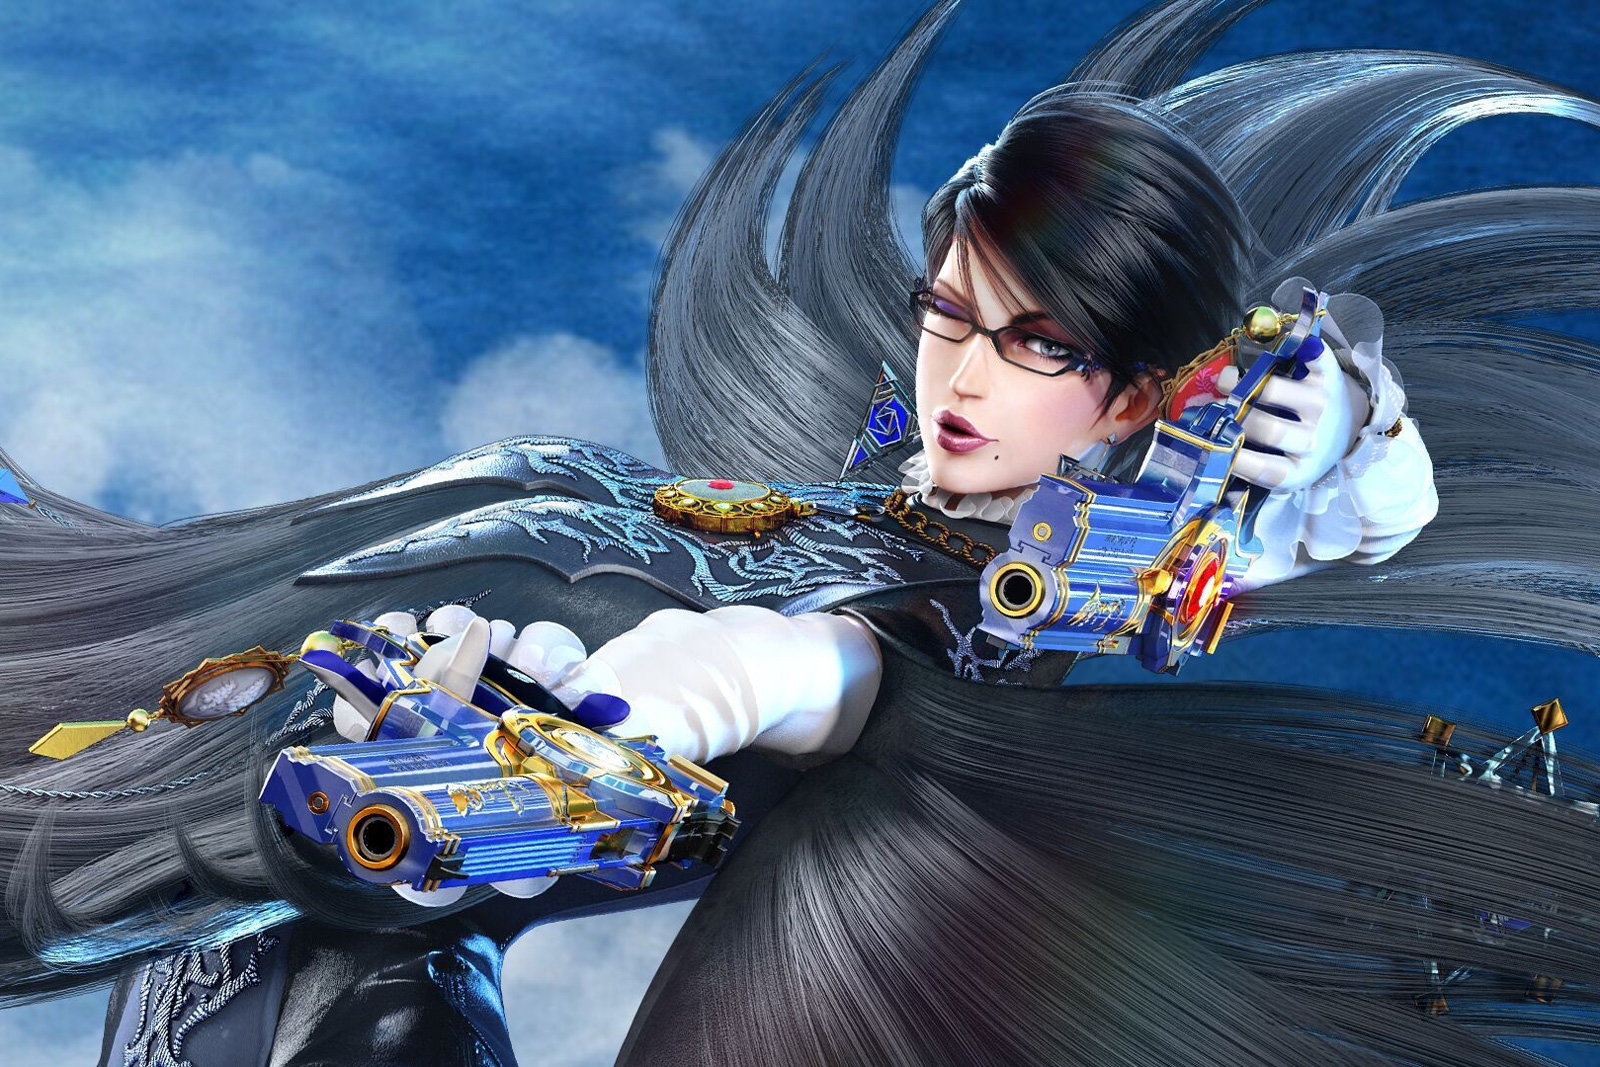 'Bayonetta' developer is the latest to throw itself at Tencent's feet | DeviceDaily.com